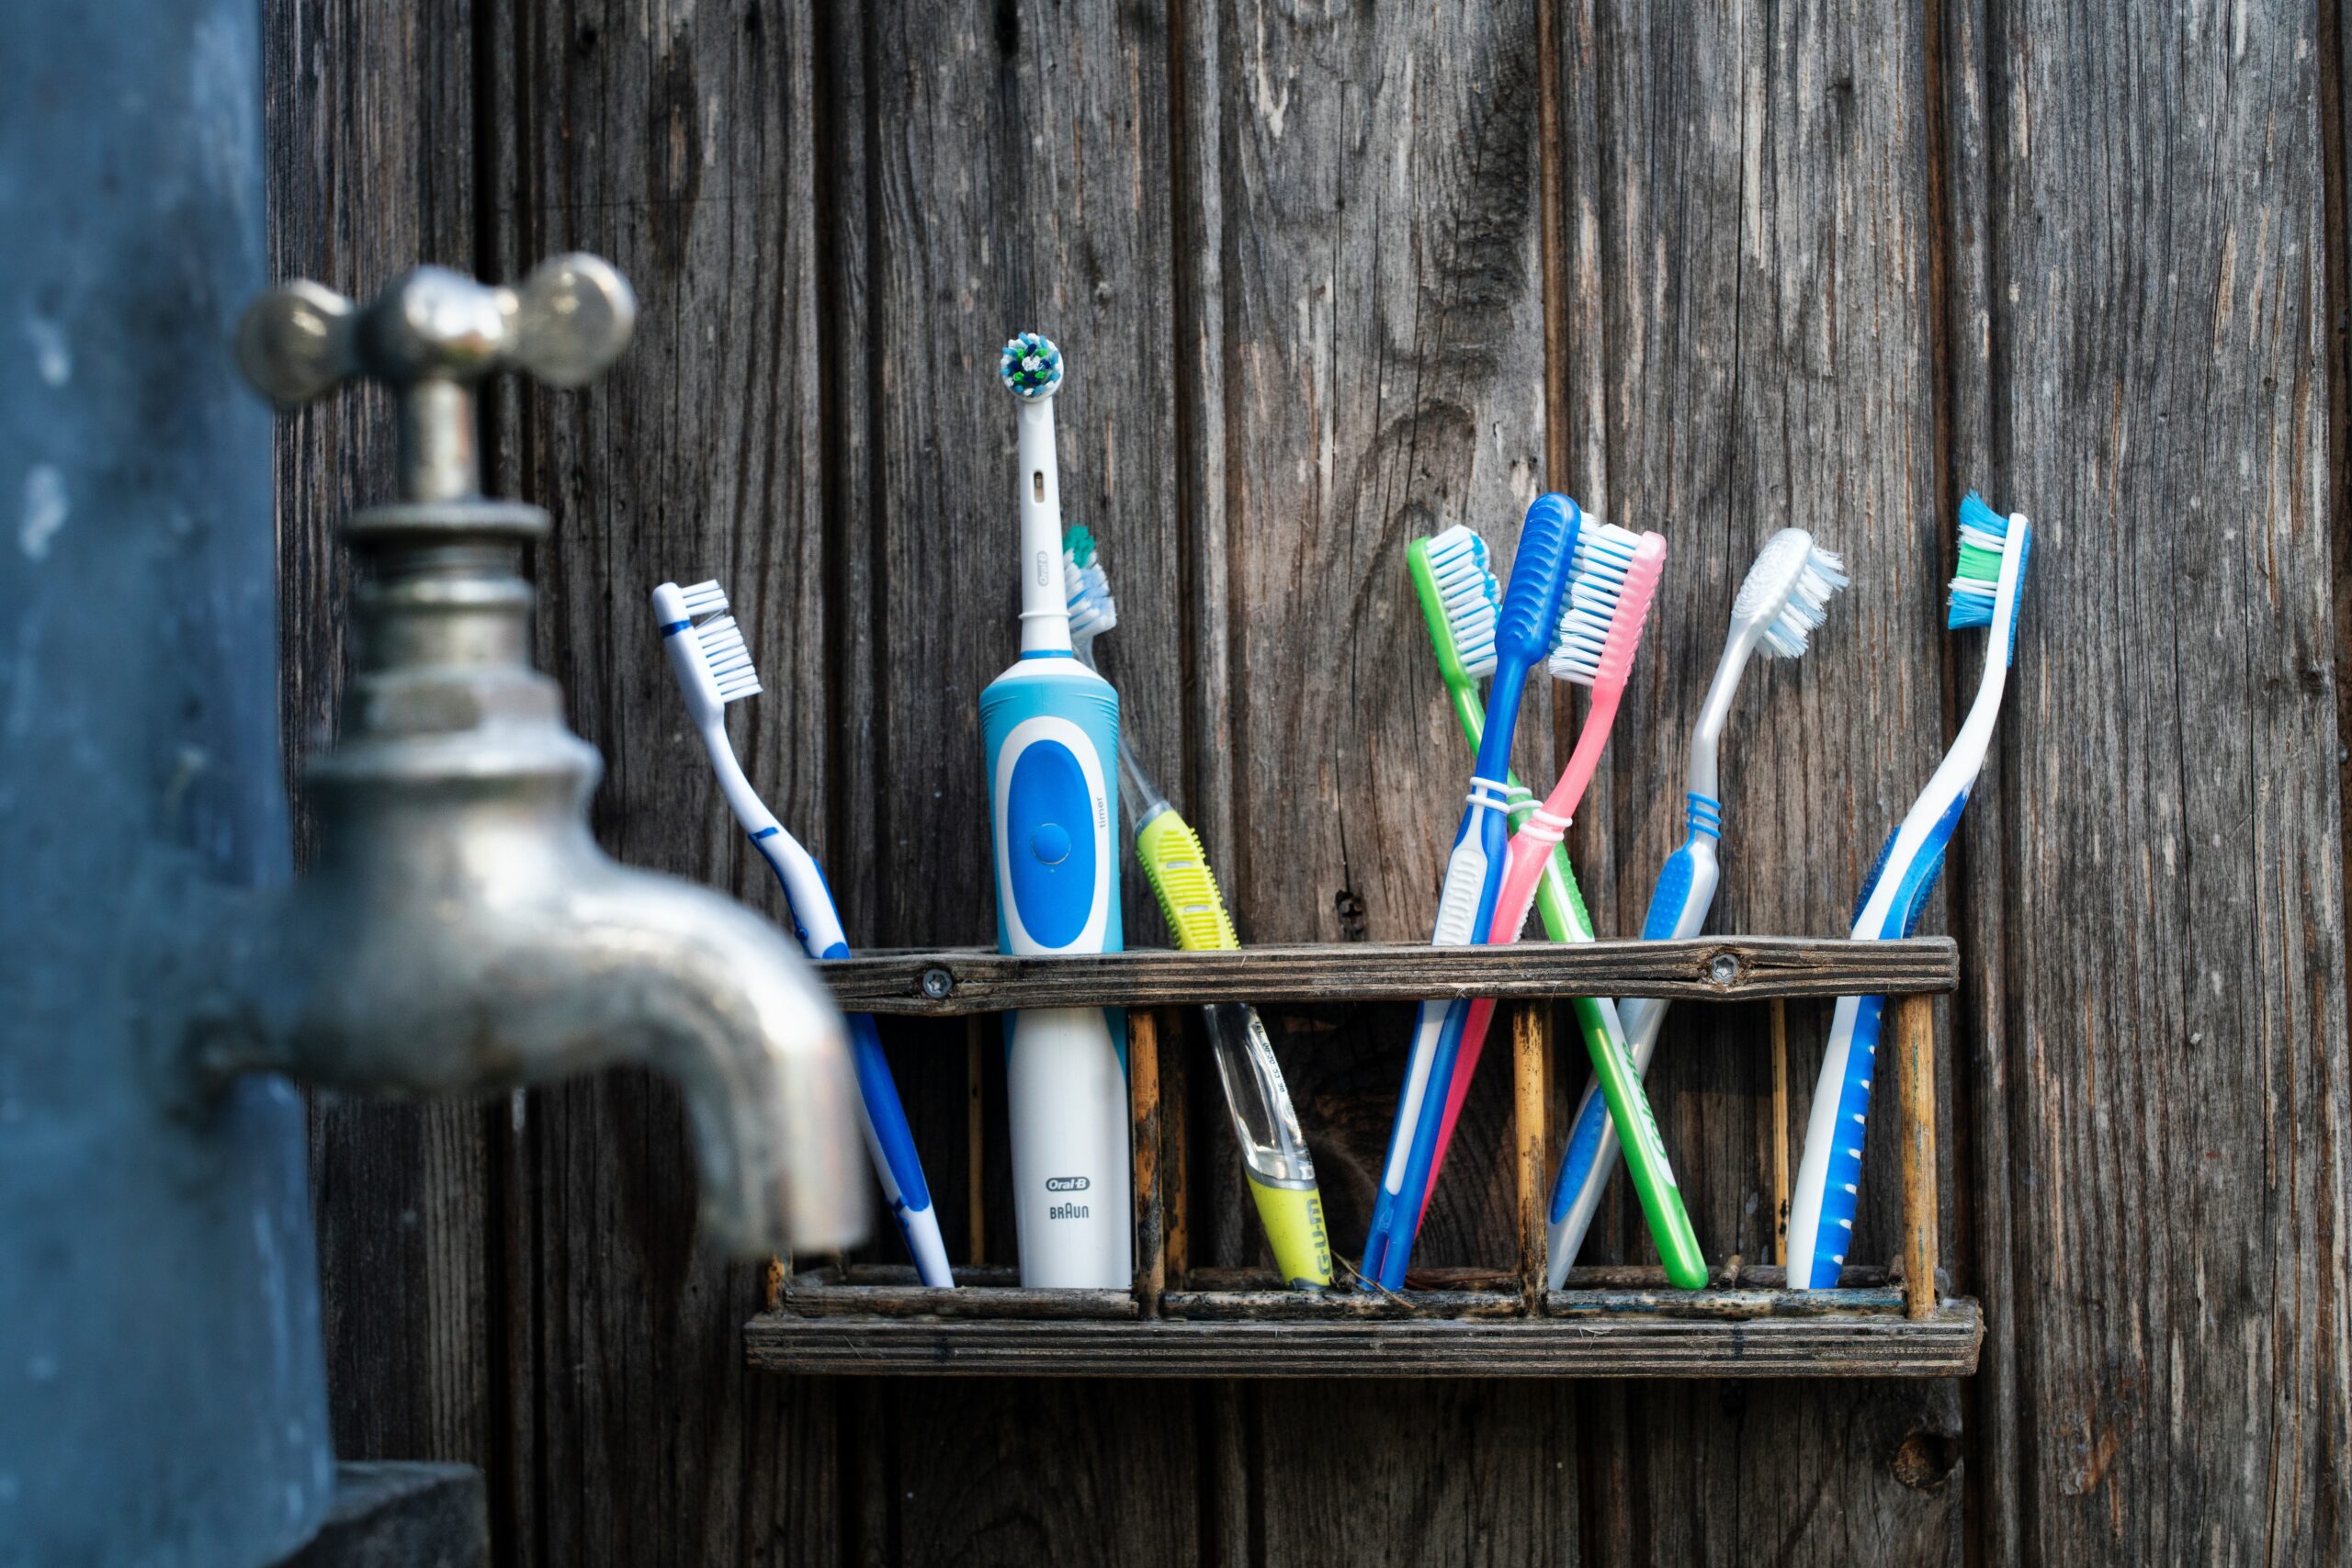 Is there a “best” toothbrush?